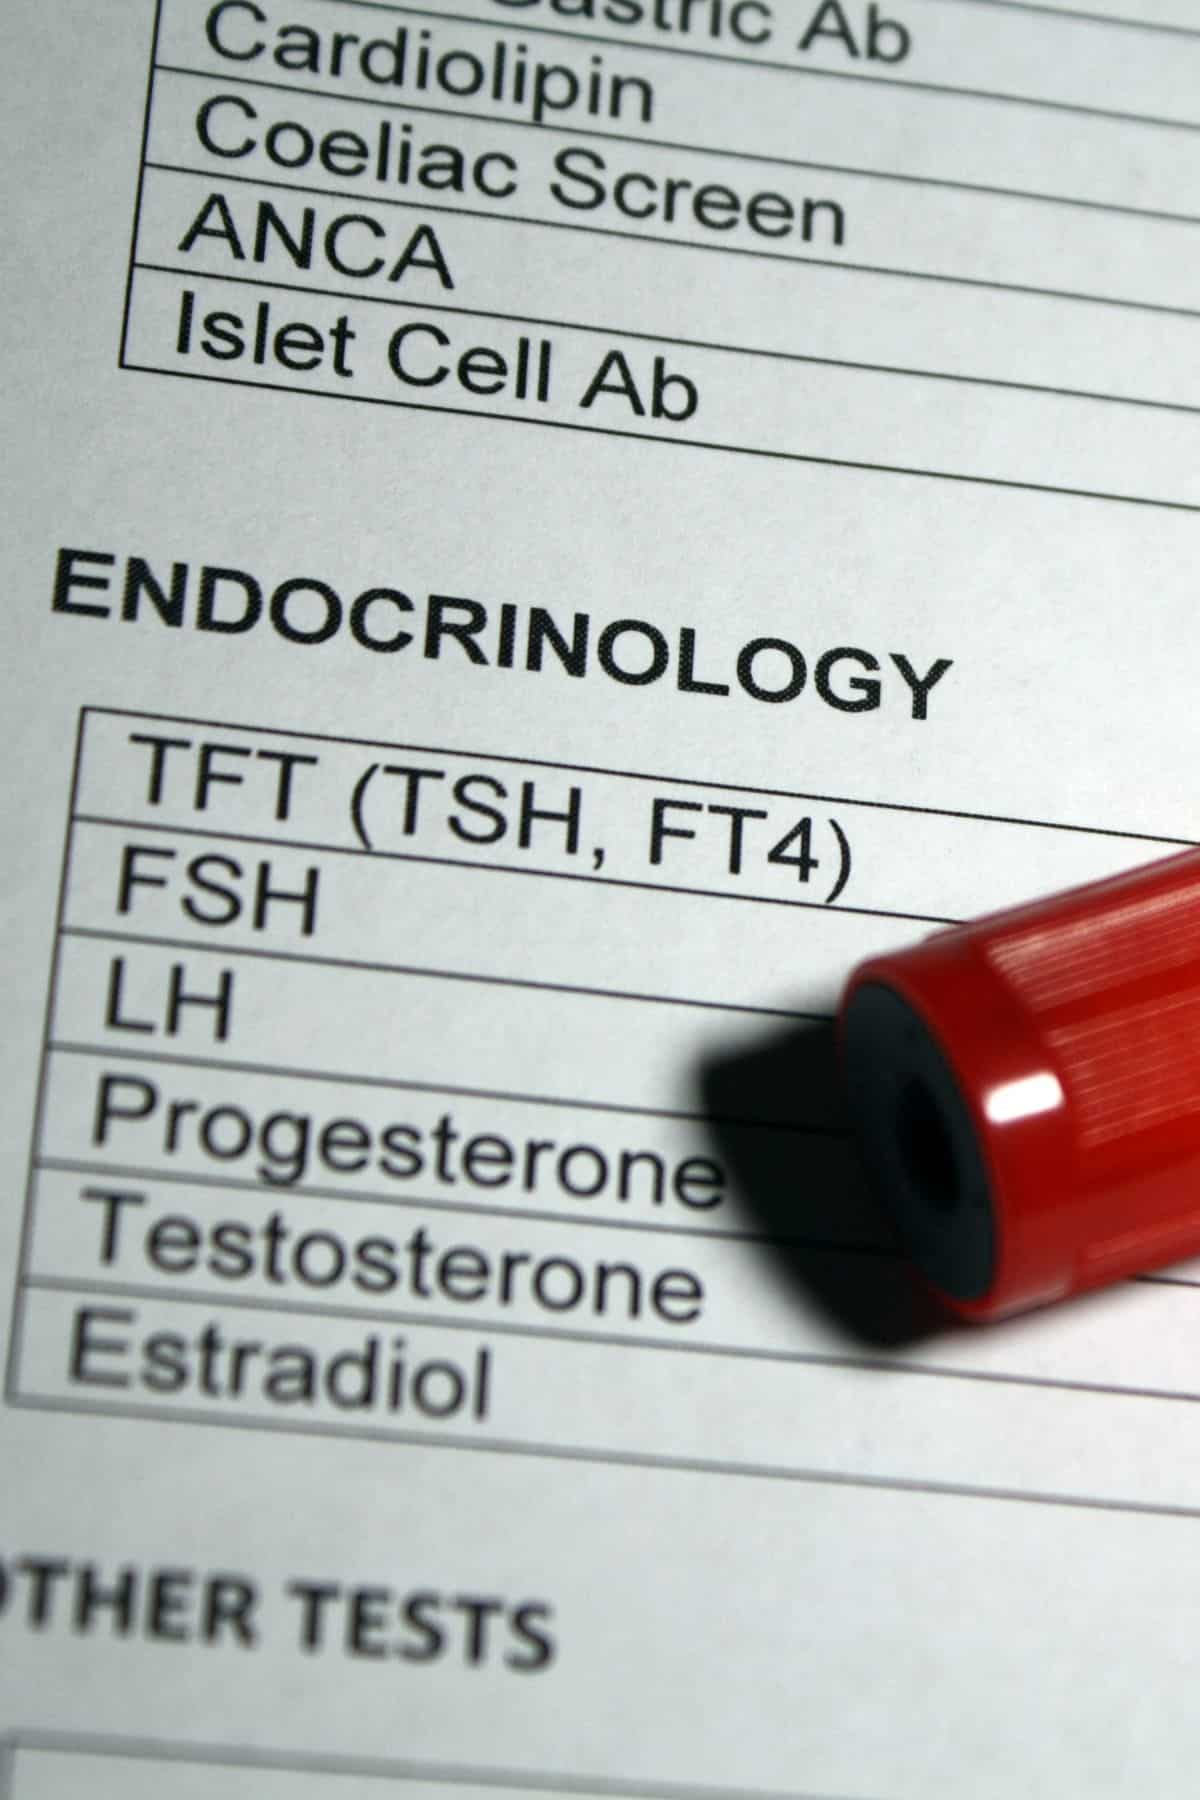 a list of hormones that are tested by an endocrinologist. 